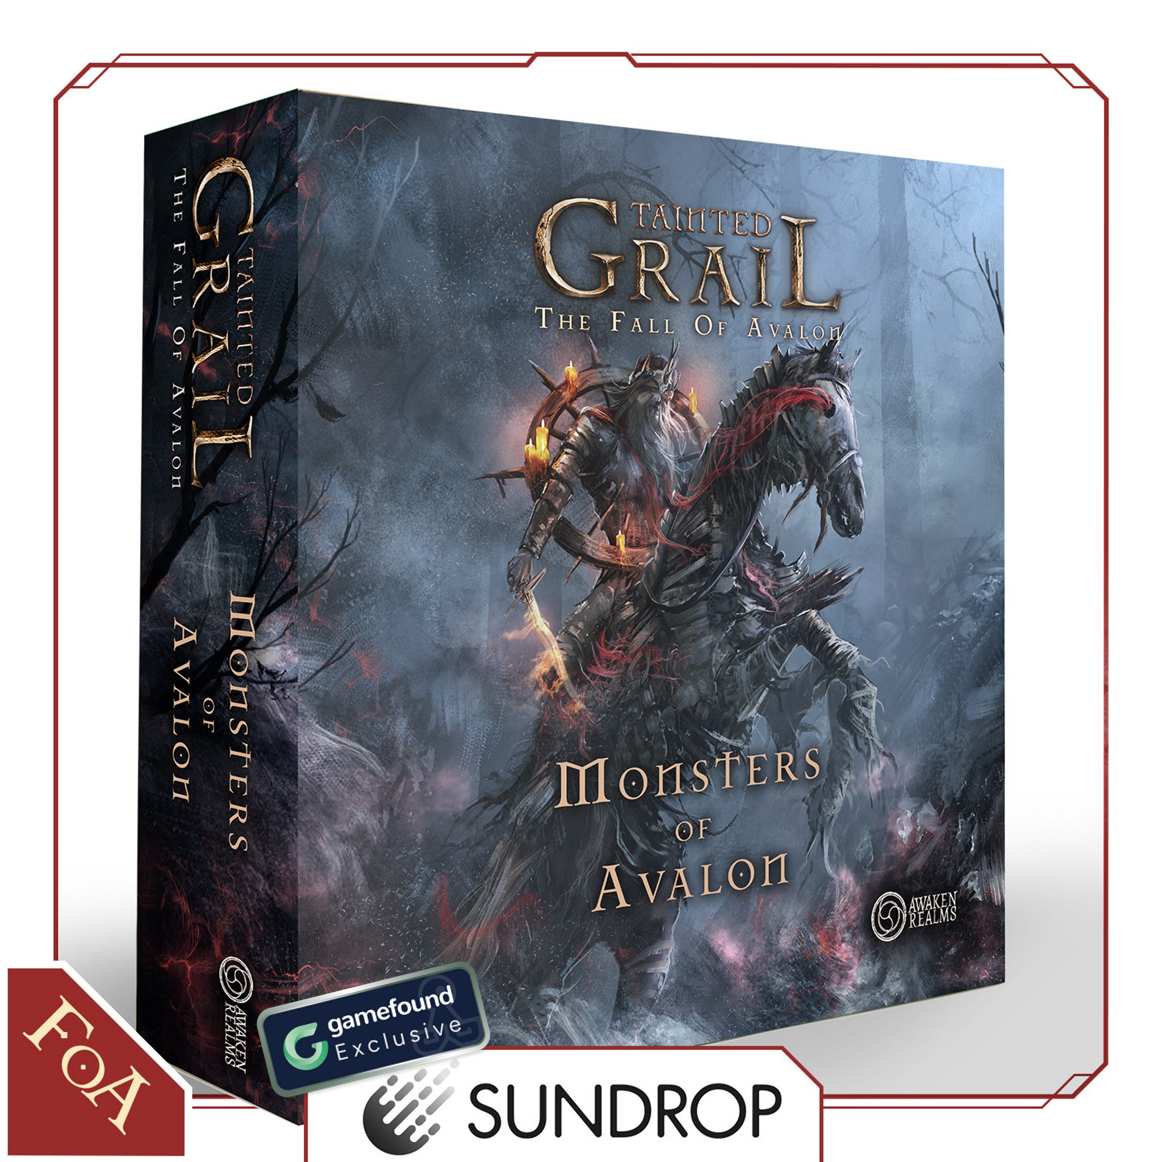 Gamefound Exclusive Tainted Grail: Fall of Avalon Monsters of Avalon Expansion, Sundrop Edition